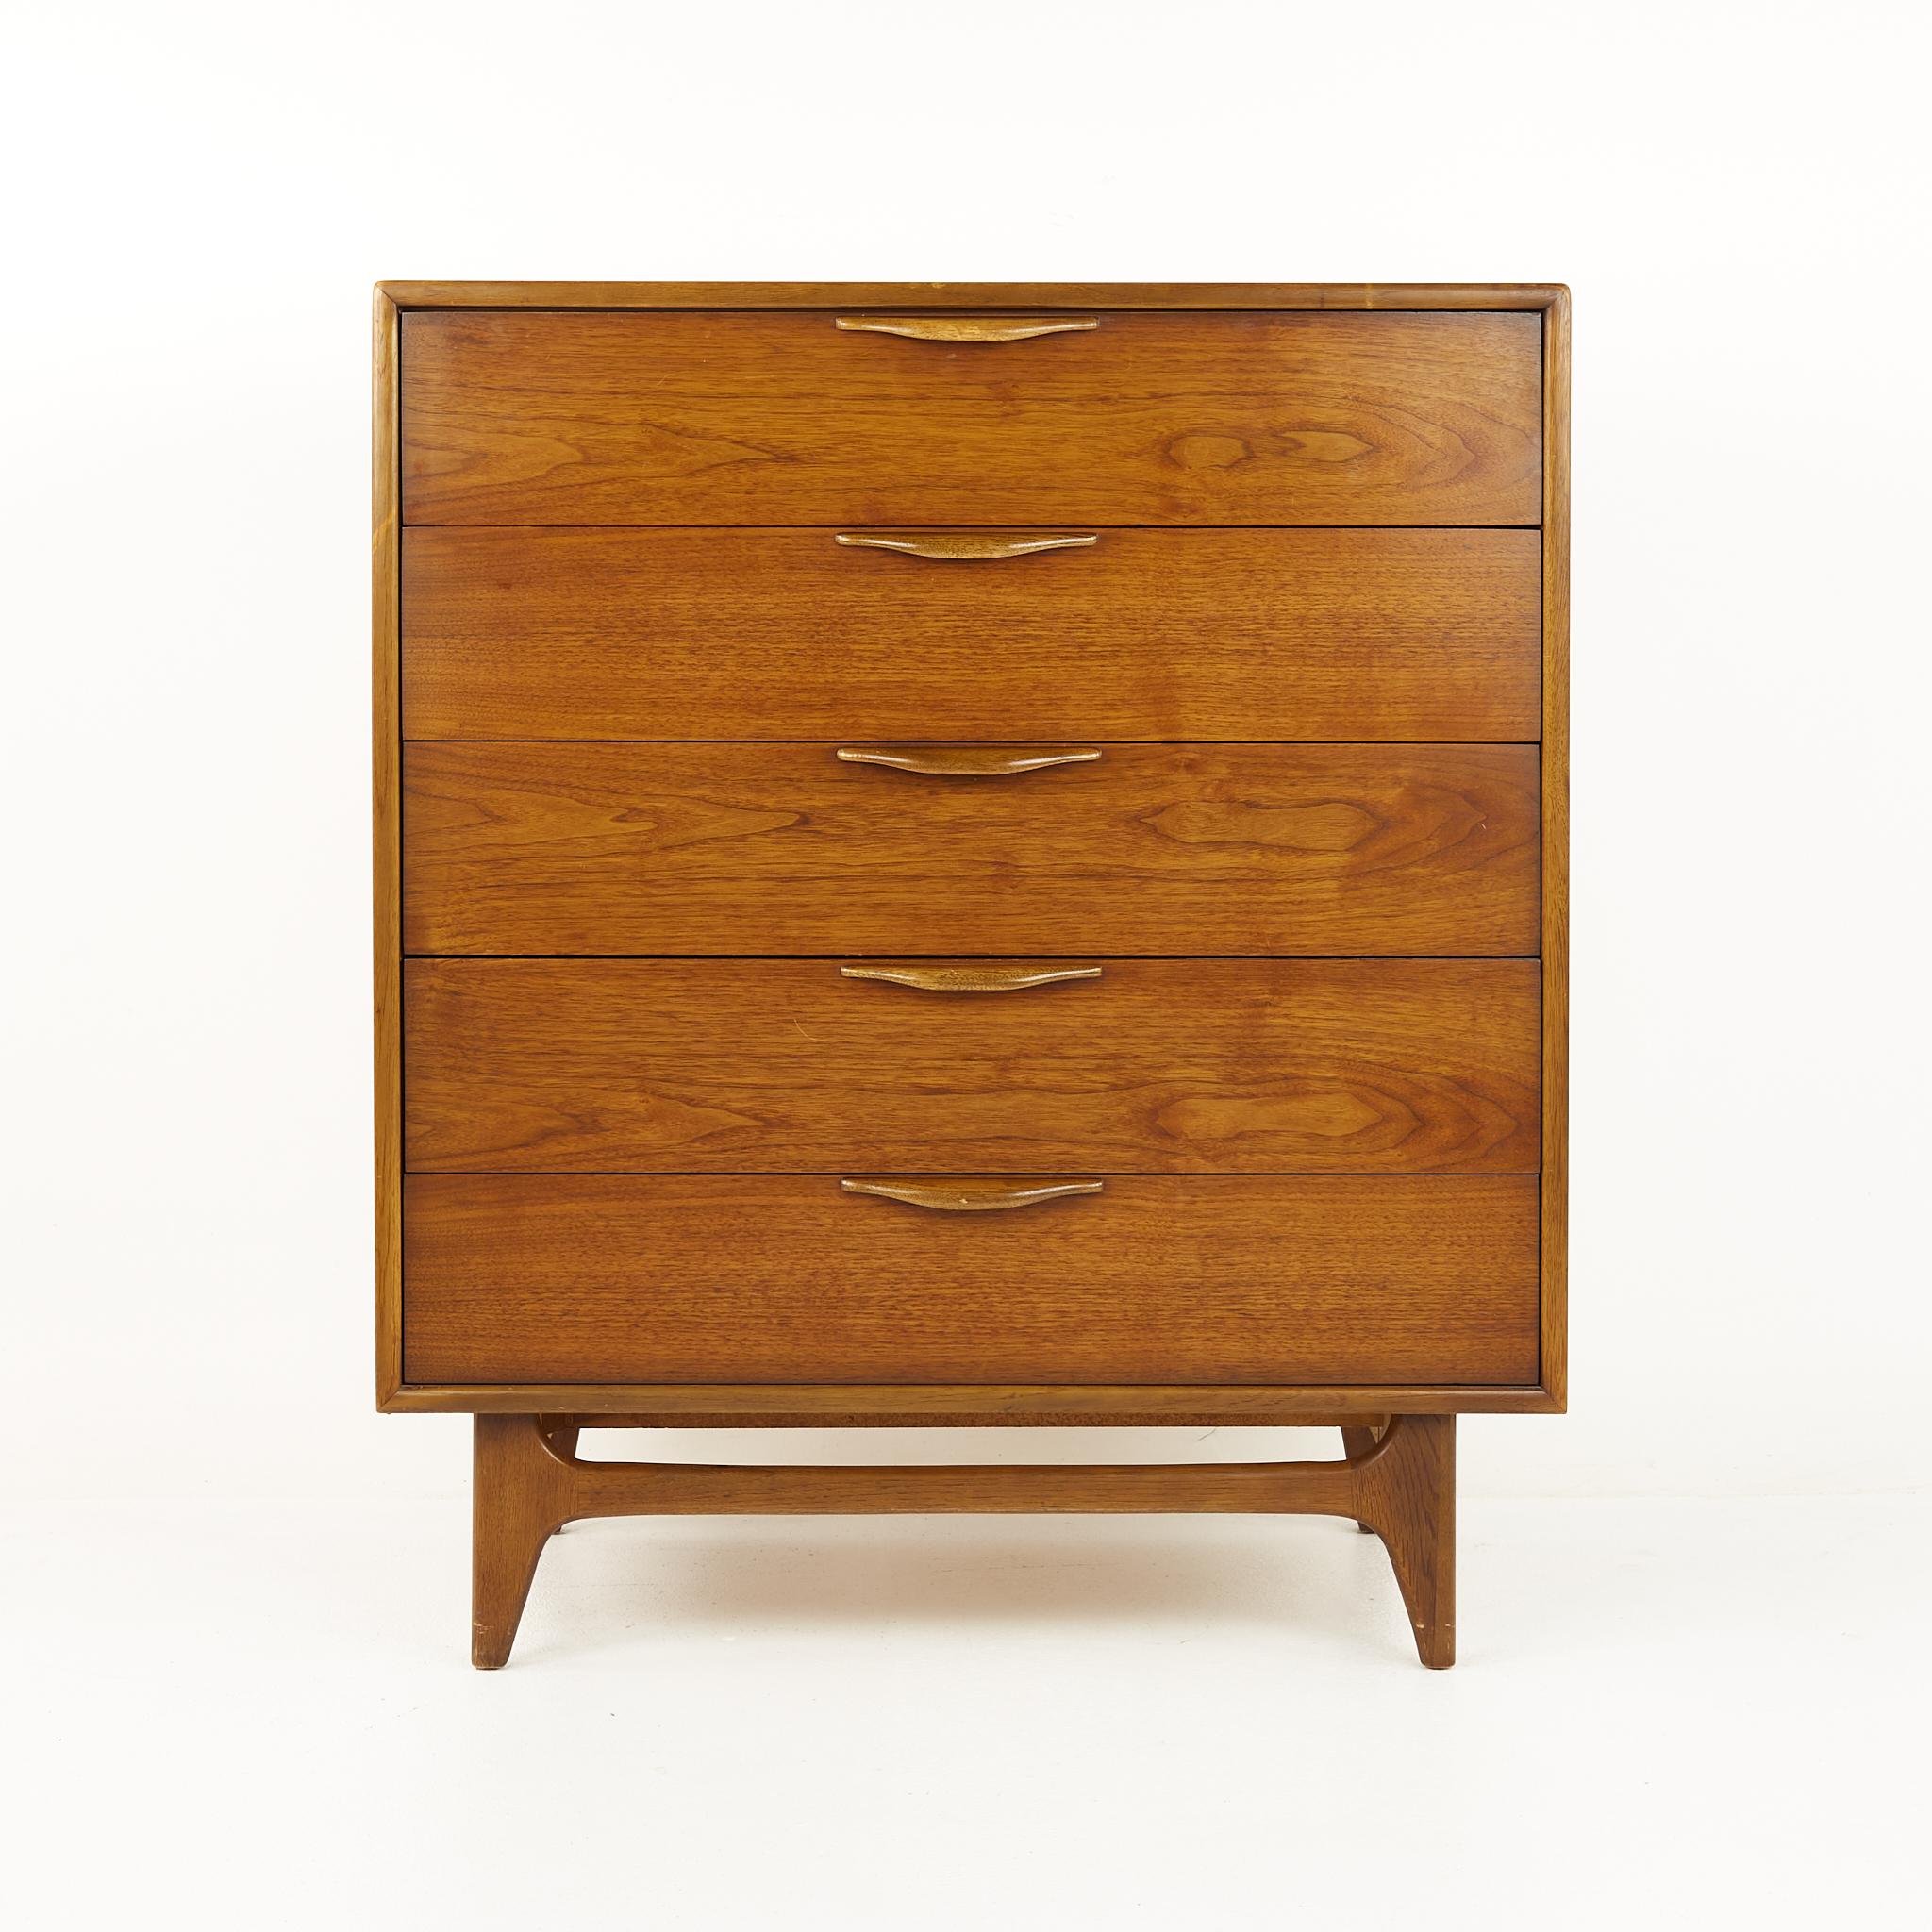 Lane perception mid century walnut 5 drawer highboy dresser

This dresser measures: 36 wide x 19.75 deep x 42.25 inches high

All pieces of furniture can be had in what we call restored vintage condition. That means the piece is restored upon